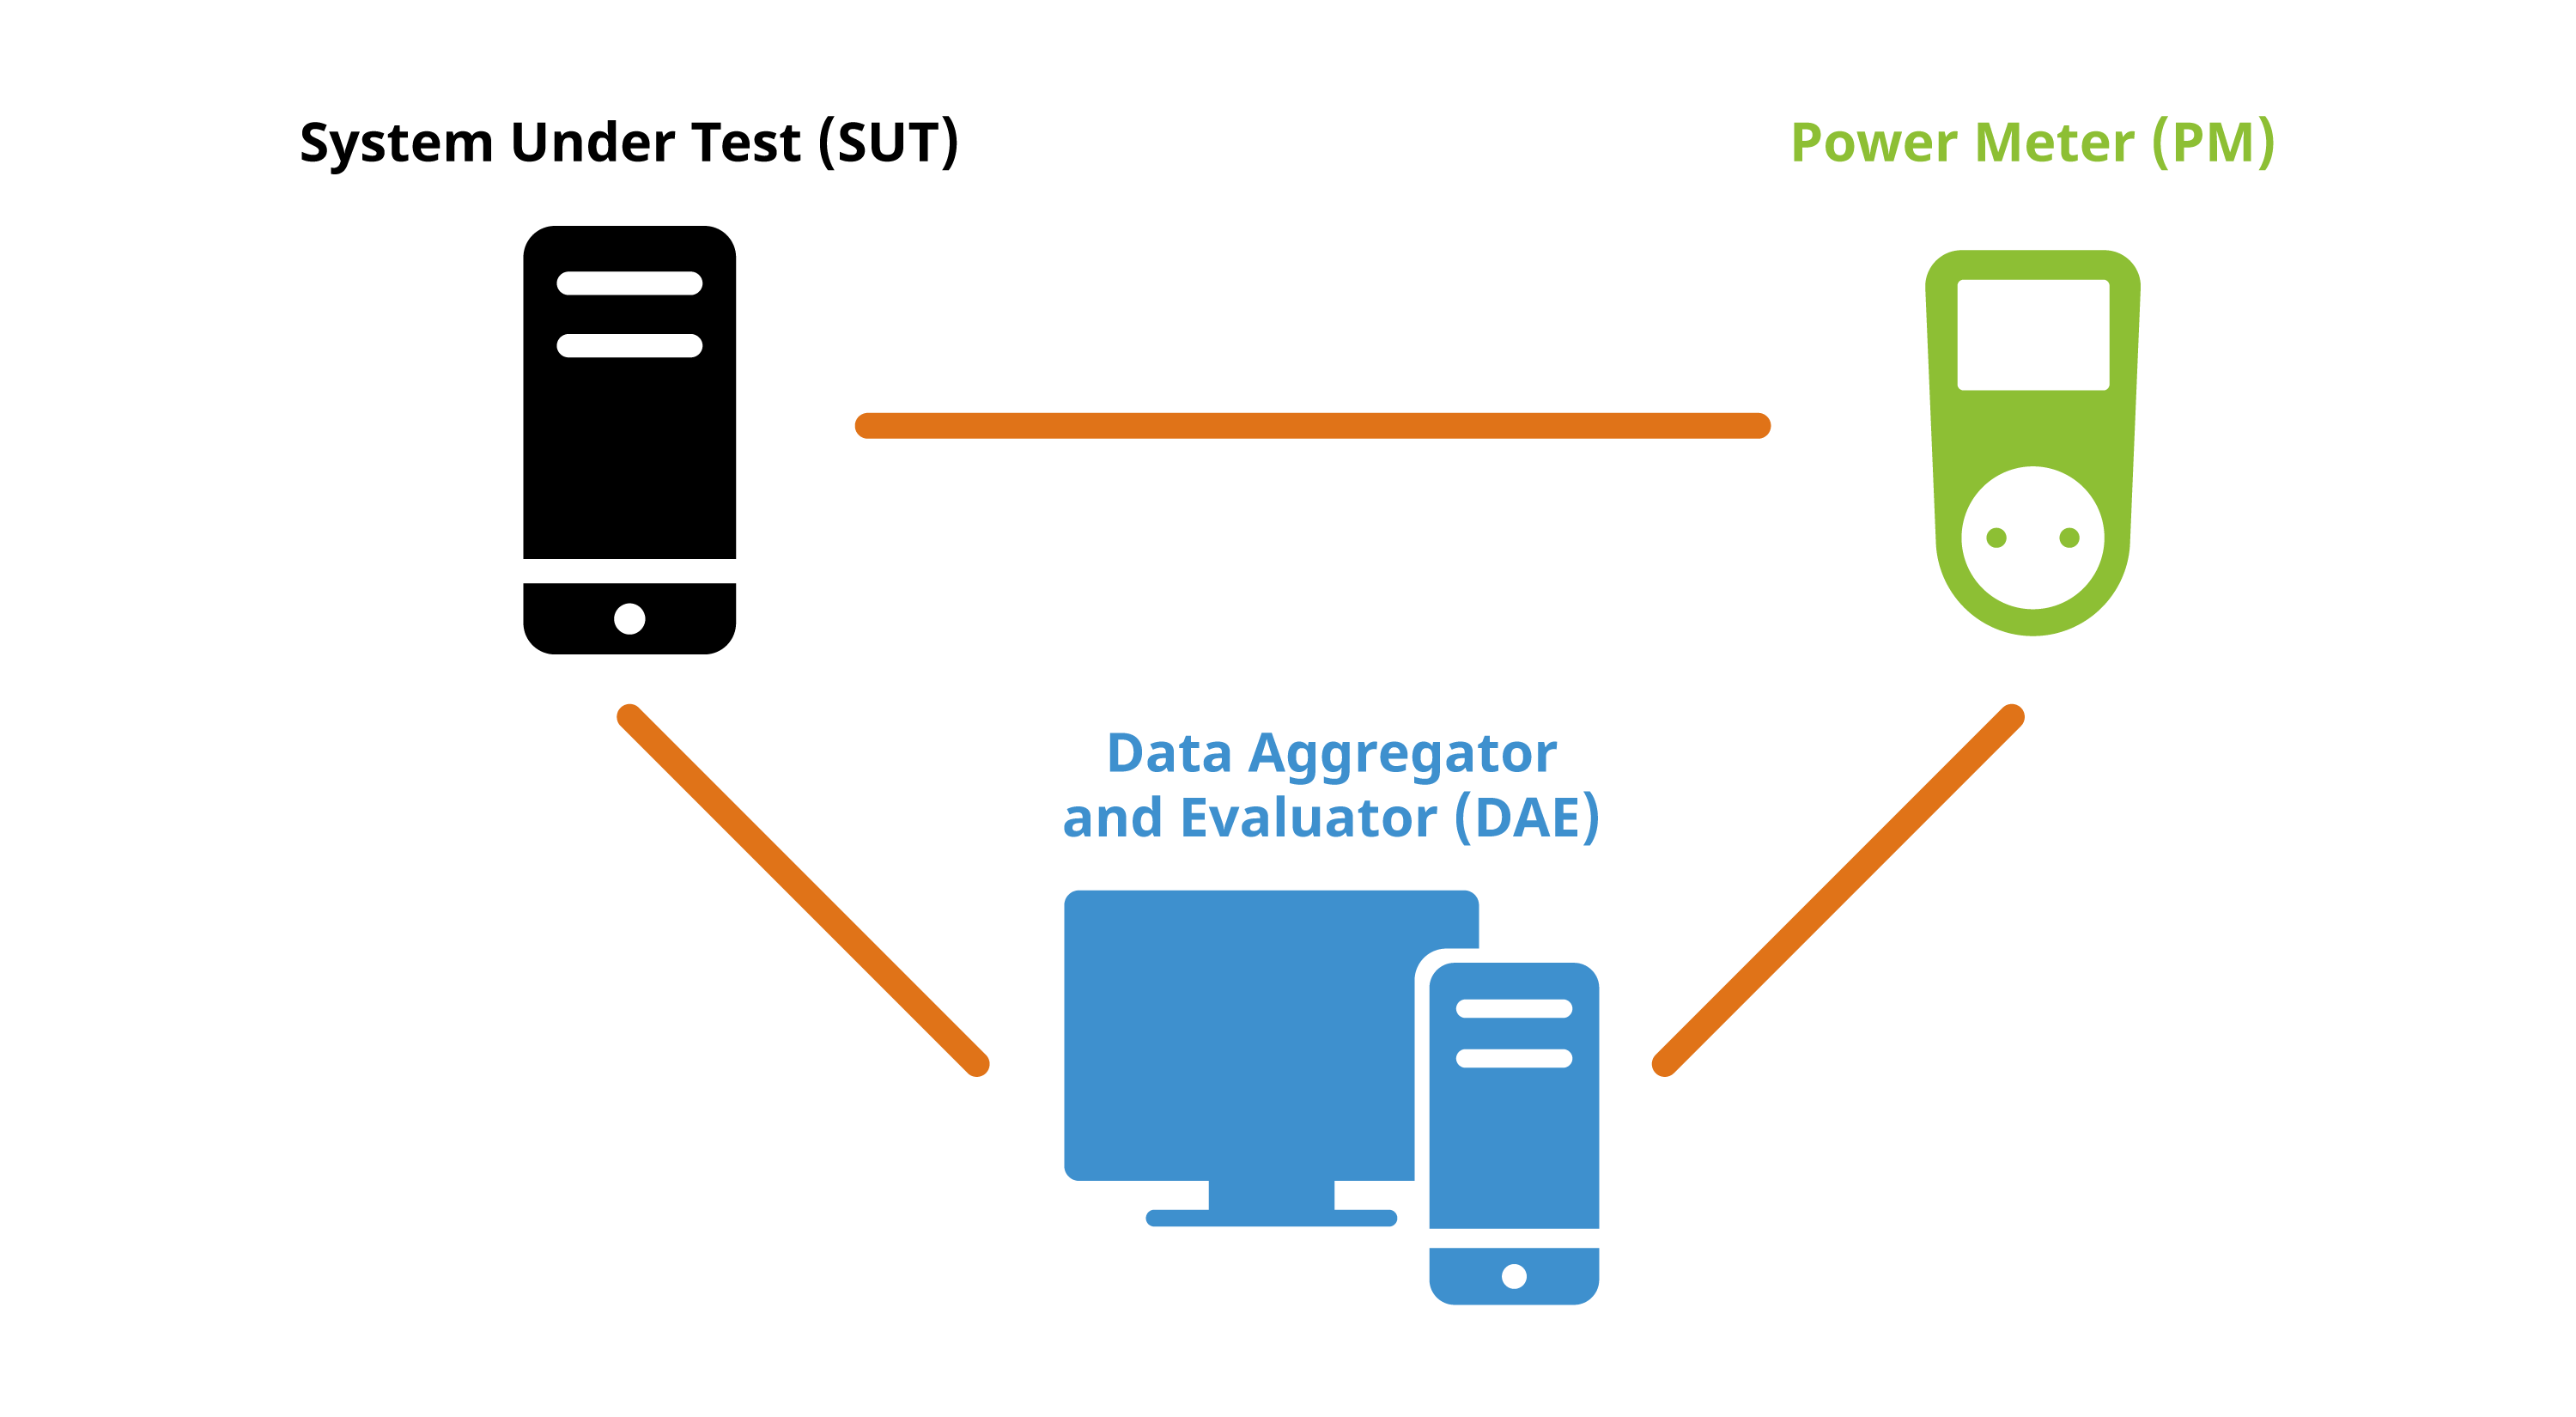 Overview of laboratory setup: System Under Test (SUT), Power Meter (PM), and Data Aggregator and Evaluator (DAE). (Image from KDE published under a <a href="https://spdx.org/licenses/CC-BY-SA-4.0.html">CC-BY-SA-4.0</a> license. Design by Lana Lutz.)